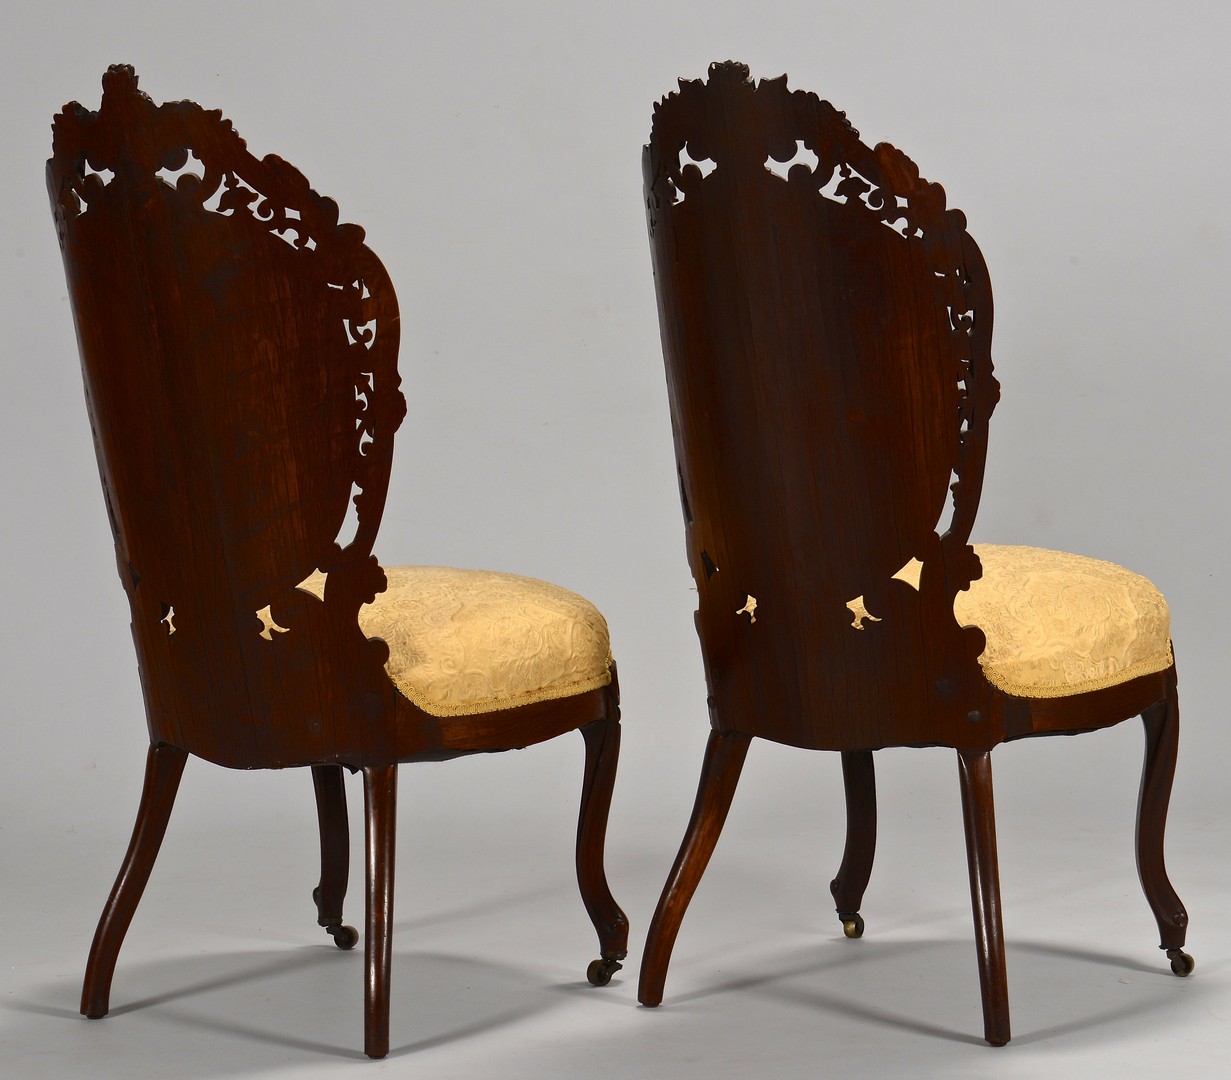 Lot 281: 2 Victorian Laminated Rosewood Chairs